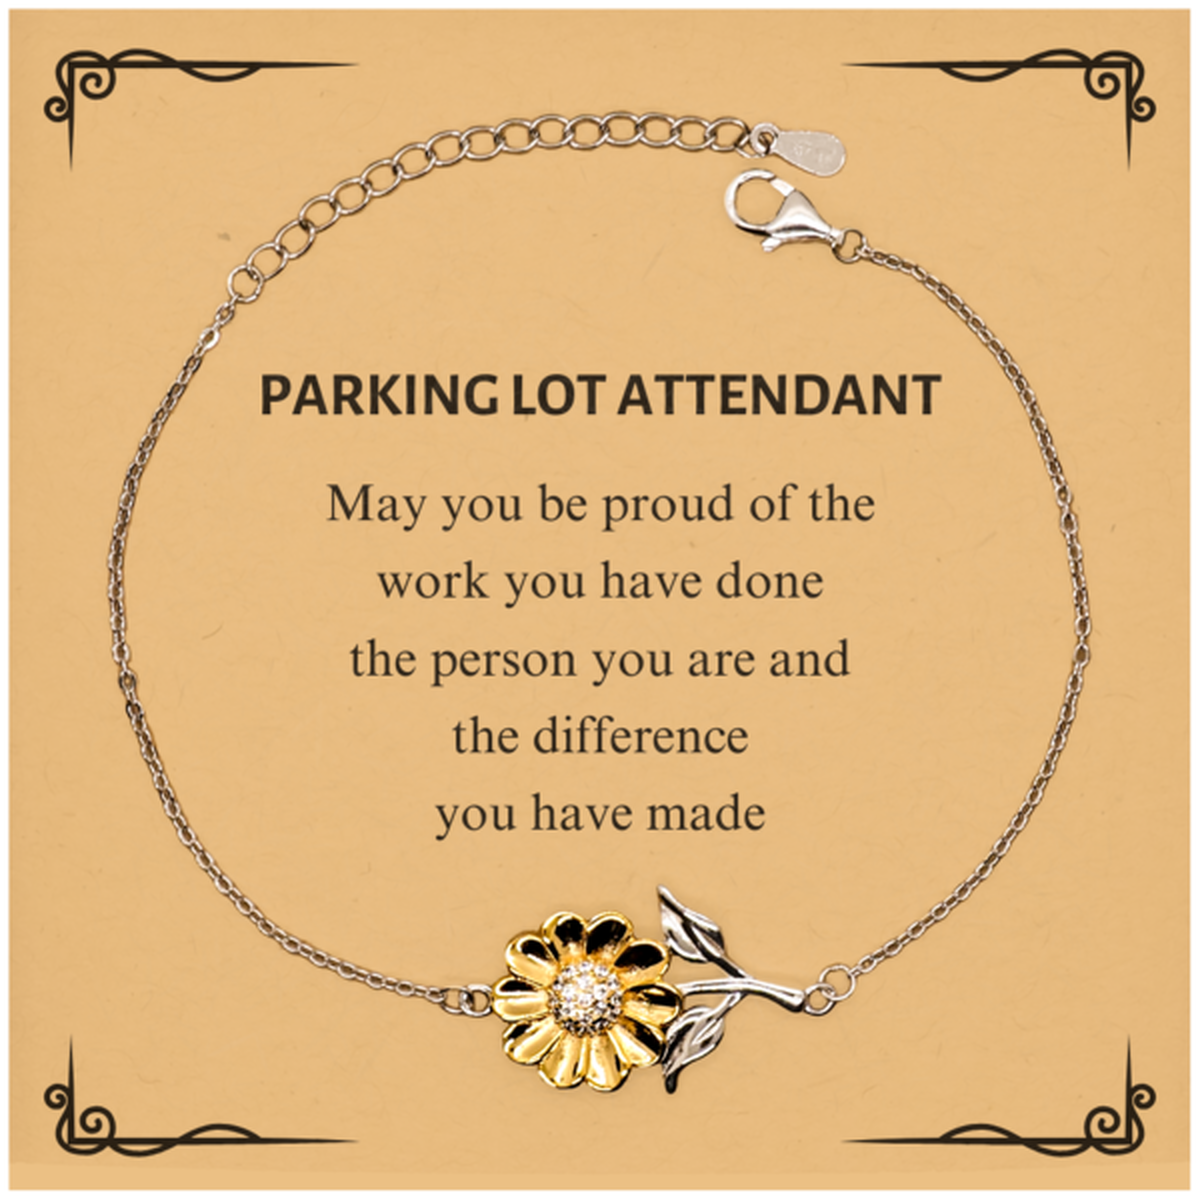 Parking Lot Attendant May you be proud of the work you have done, Retirement Parking Lot Attendant Sunflower Bracelet for Colleague Appreciation Gifts Amazing for Parking Lot Attendant